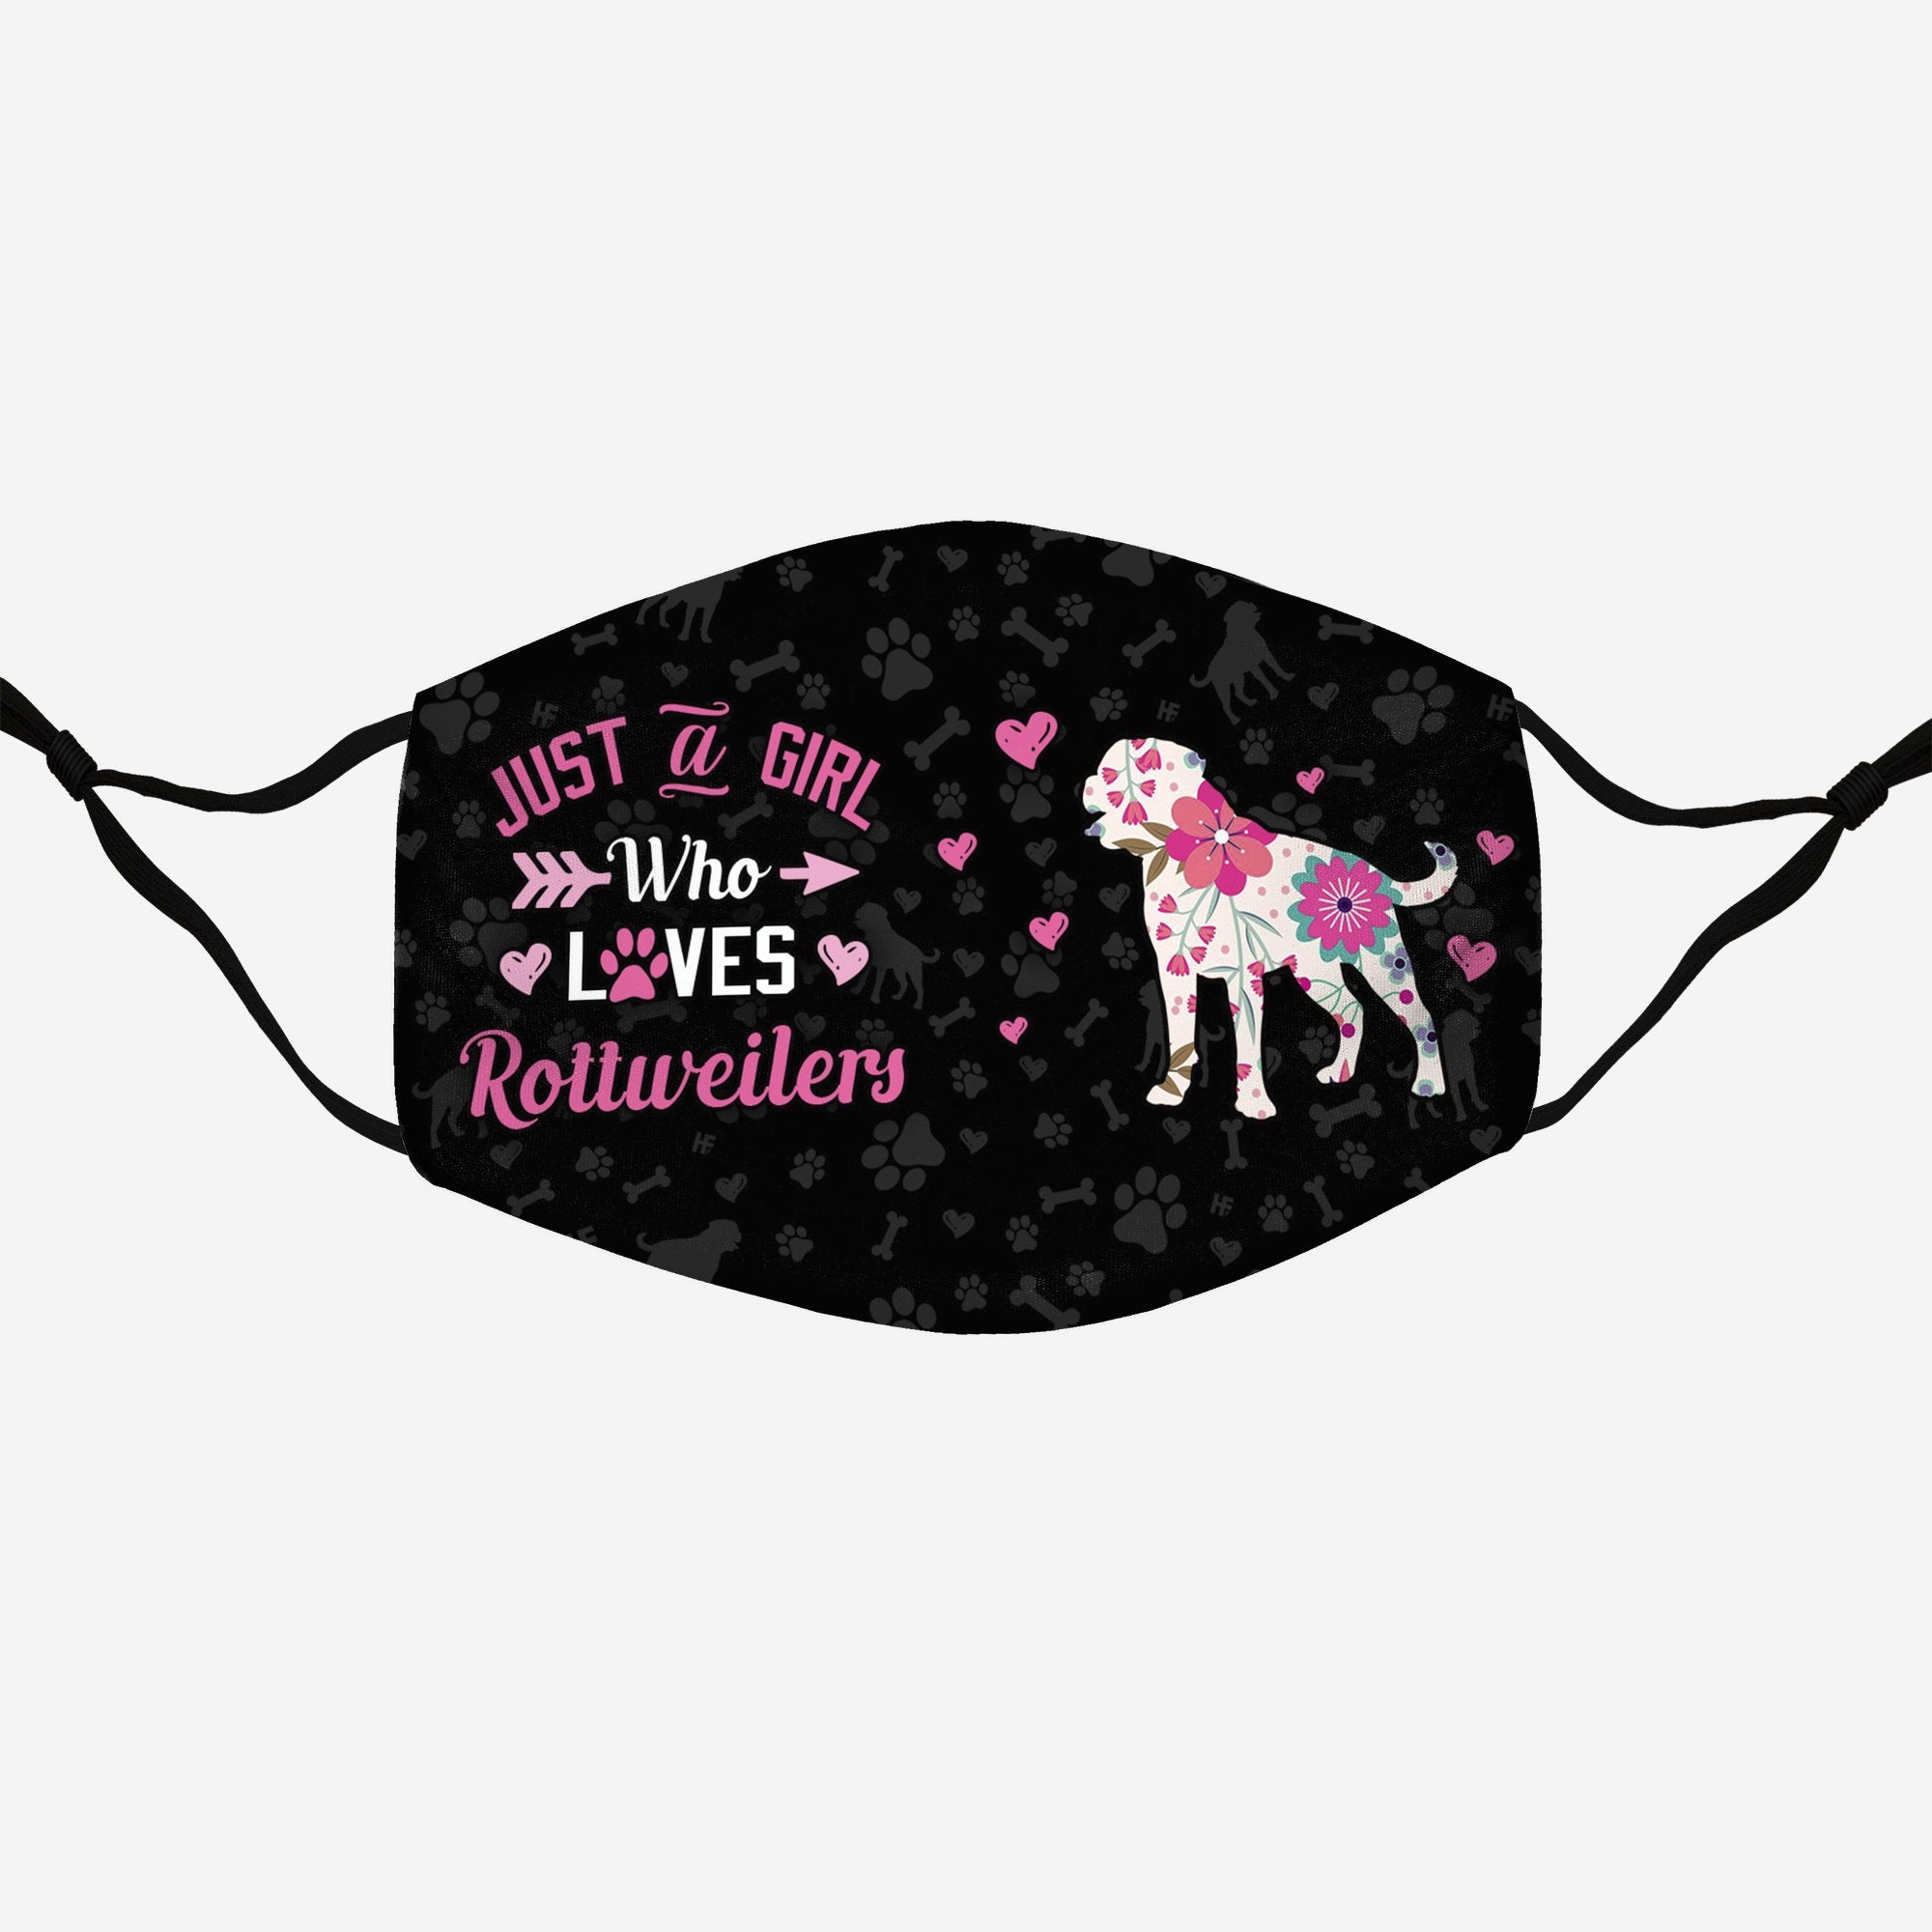 Just A Girl Who Loves Rottweilers EZ07 2807 Face Mask